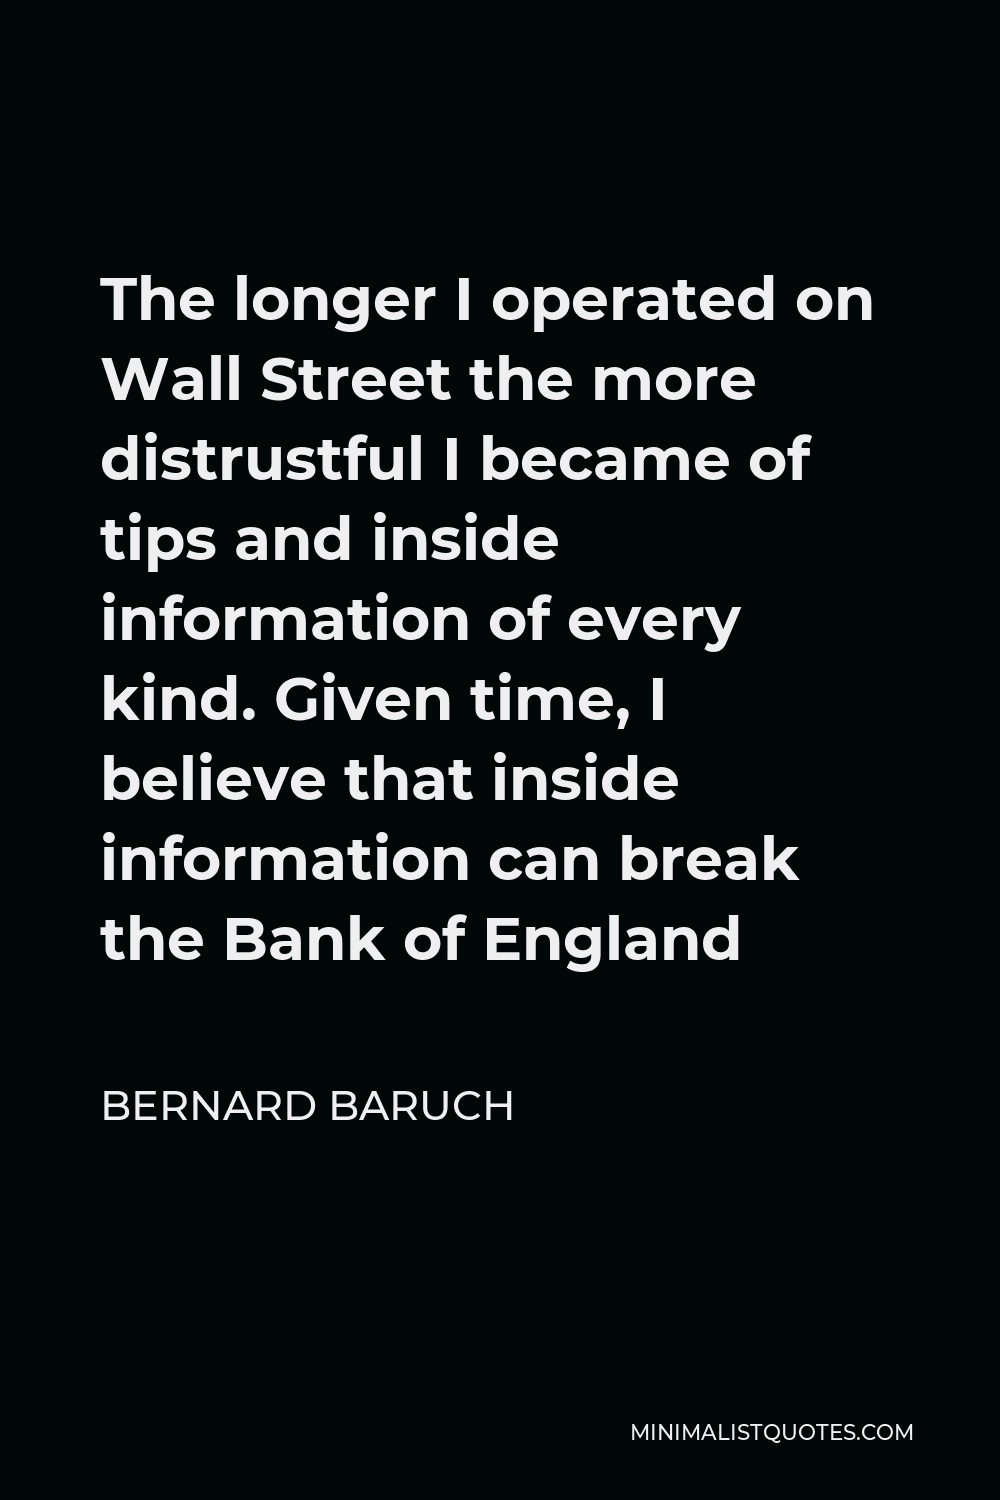 Bernard Baruch Quote - The longer I operated on Wall Street the more distrustful I became of tips and inside information of every kind. Given time, I believe that inside information can break the Bank of England